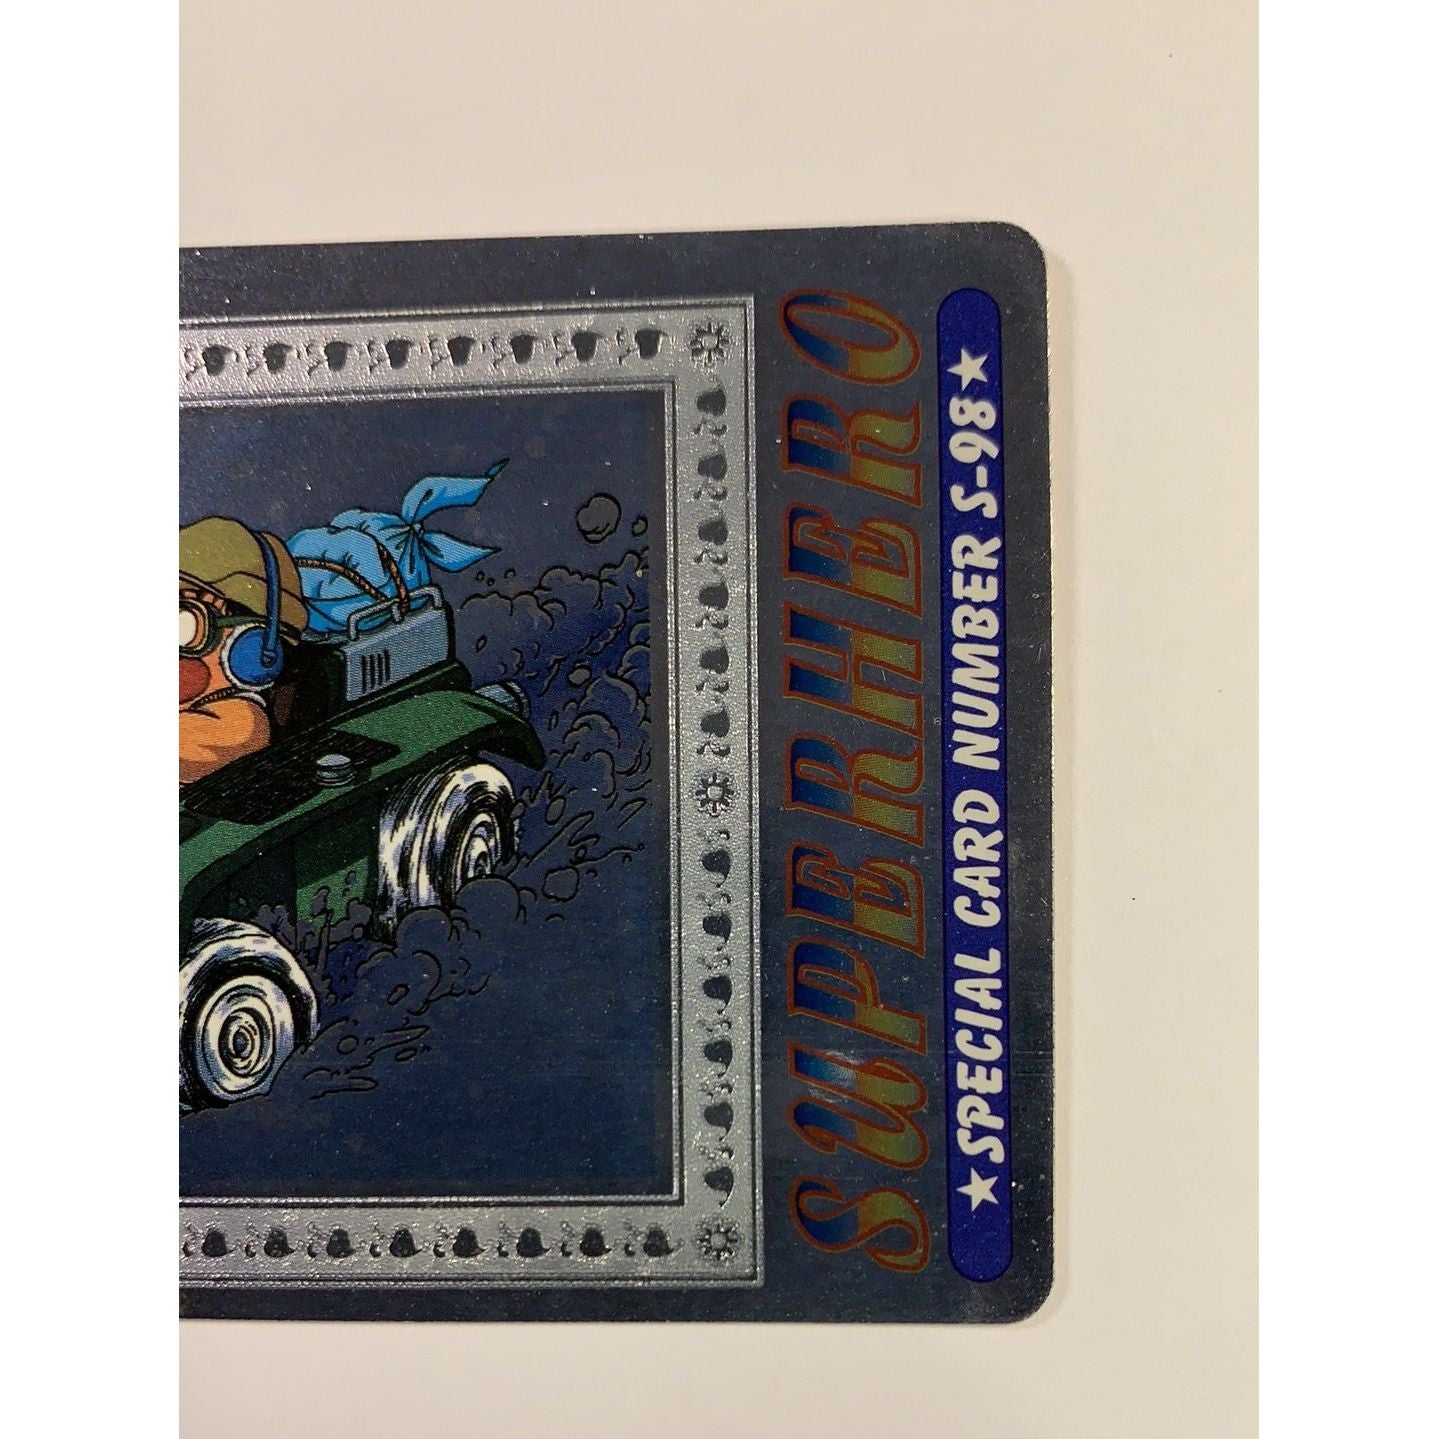  1995 Cardass Adali Super Hero Special Card S-98 Silver Foil Goku  Local Legends Cards & Collectibles